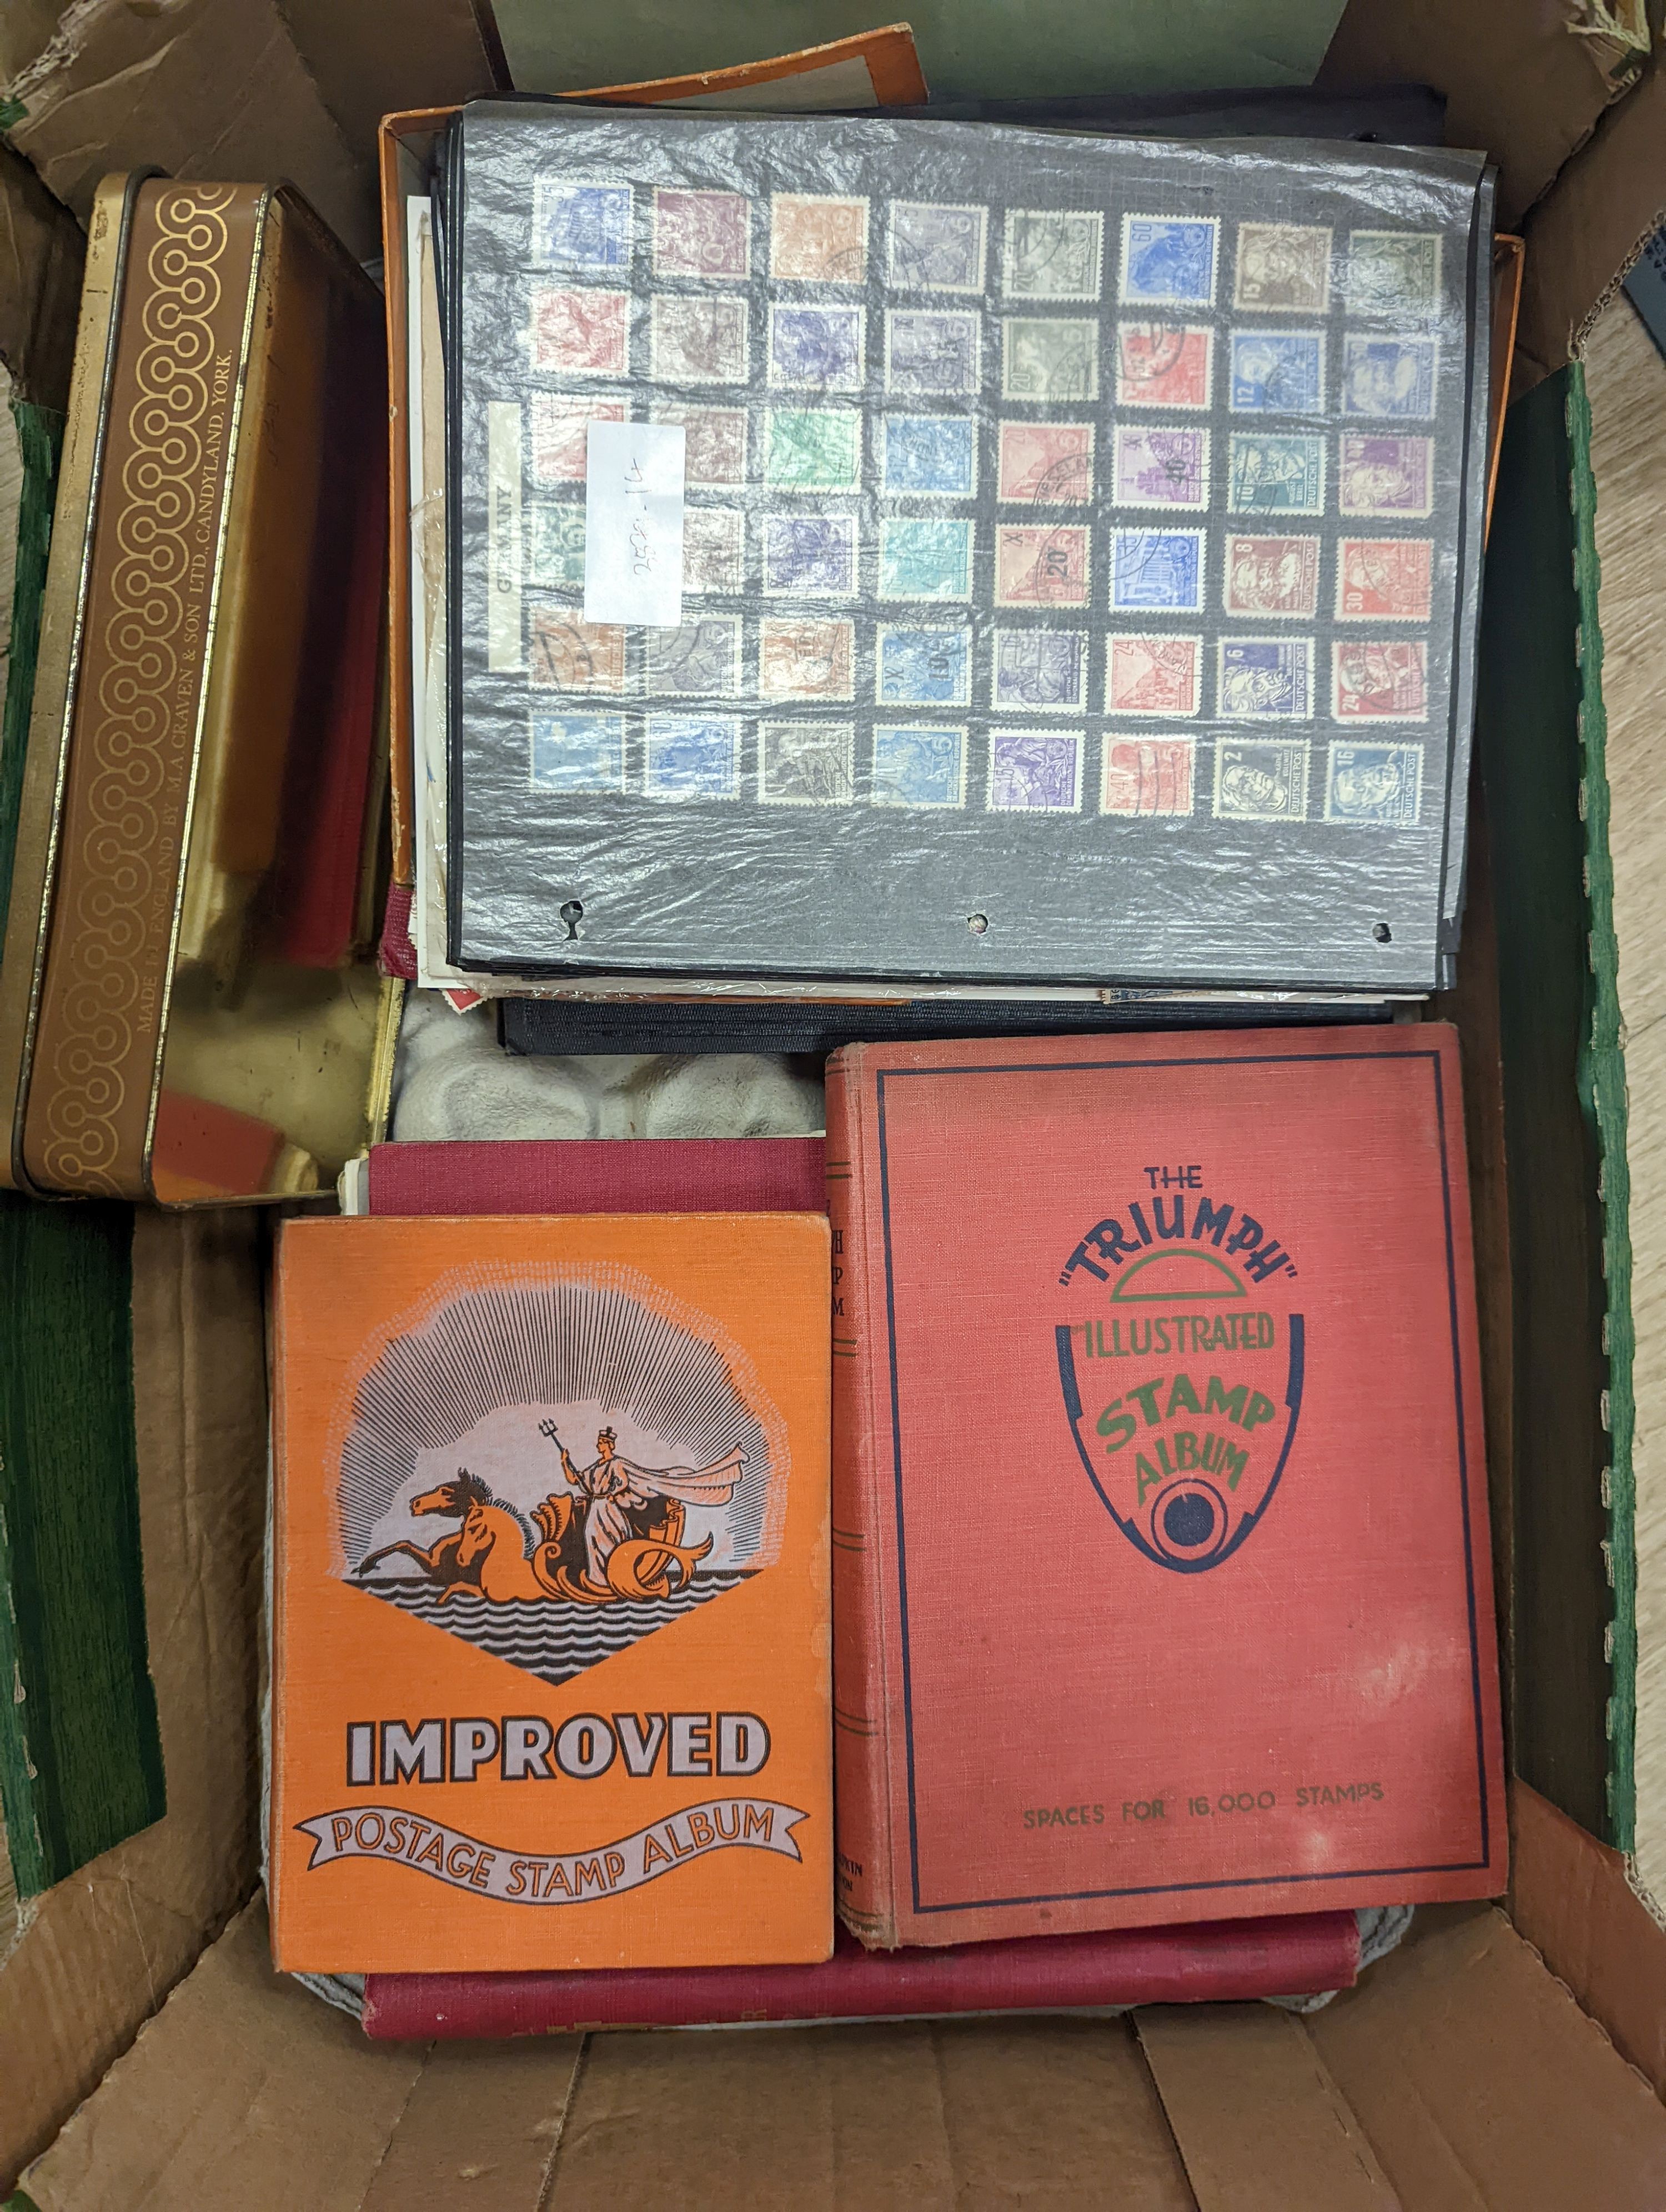 A quantity of loose stamps and albums